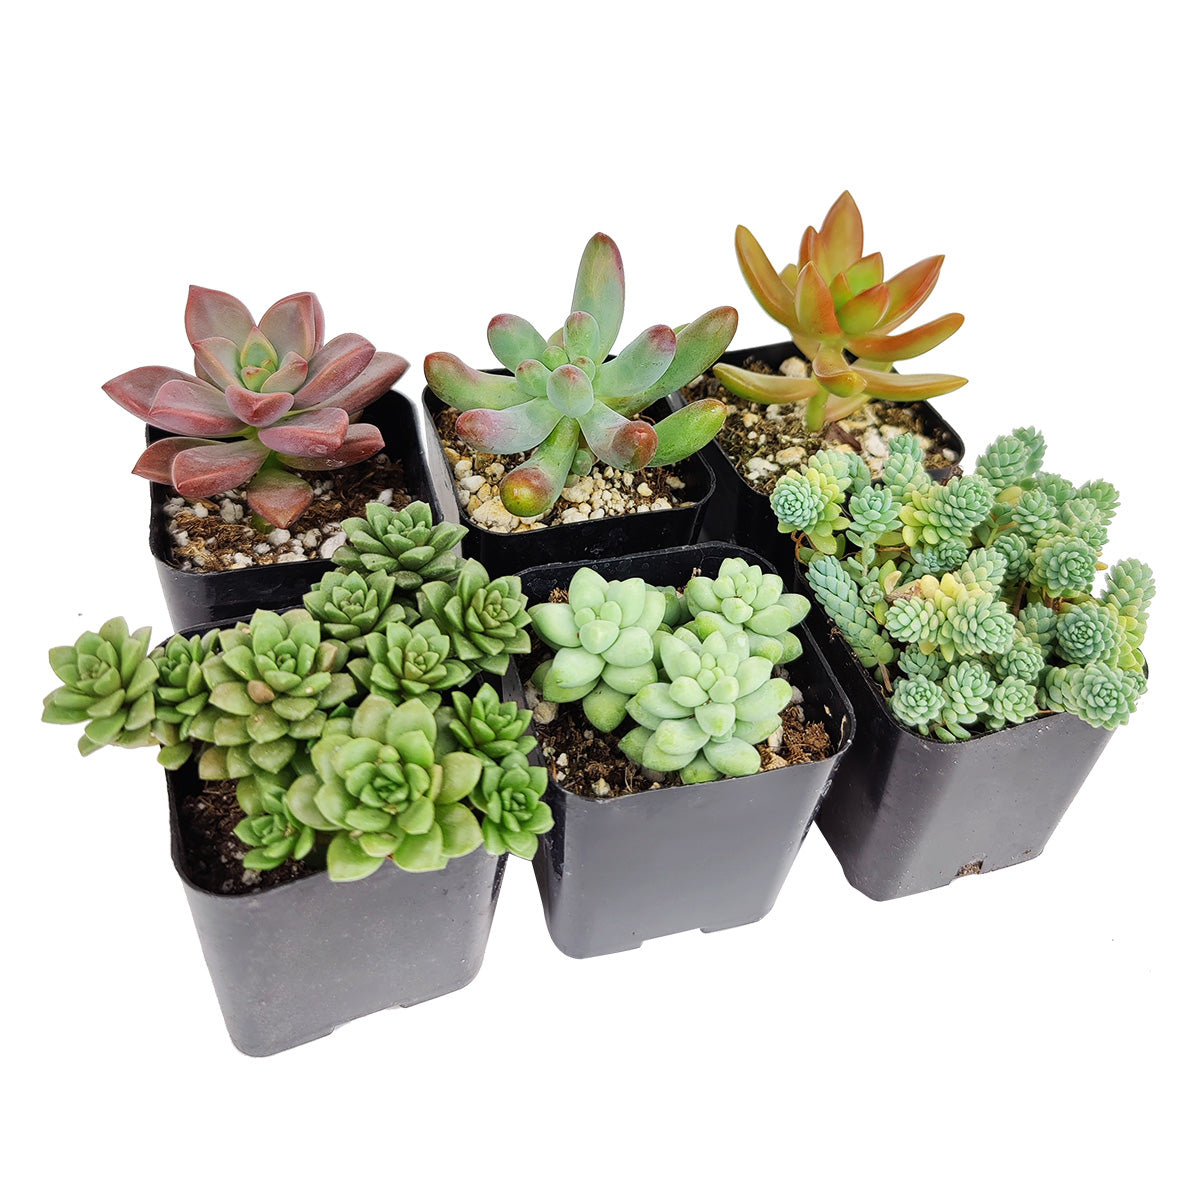 Live Sedum Assorted Pack for sale, A Variety of Healthy Live Sedum Succulent Plant, Colorful Sedum Gift Ideas, How to care for Sedum Succulent, How to grow Sedum Succulent Indoor, Sedum, Sedum succulent, Sedum types, succulent Sedum, buy succulents online, succulent shop, succulent store, Sedum plant, indoor succulents